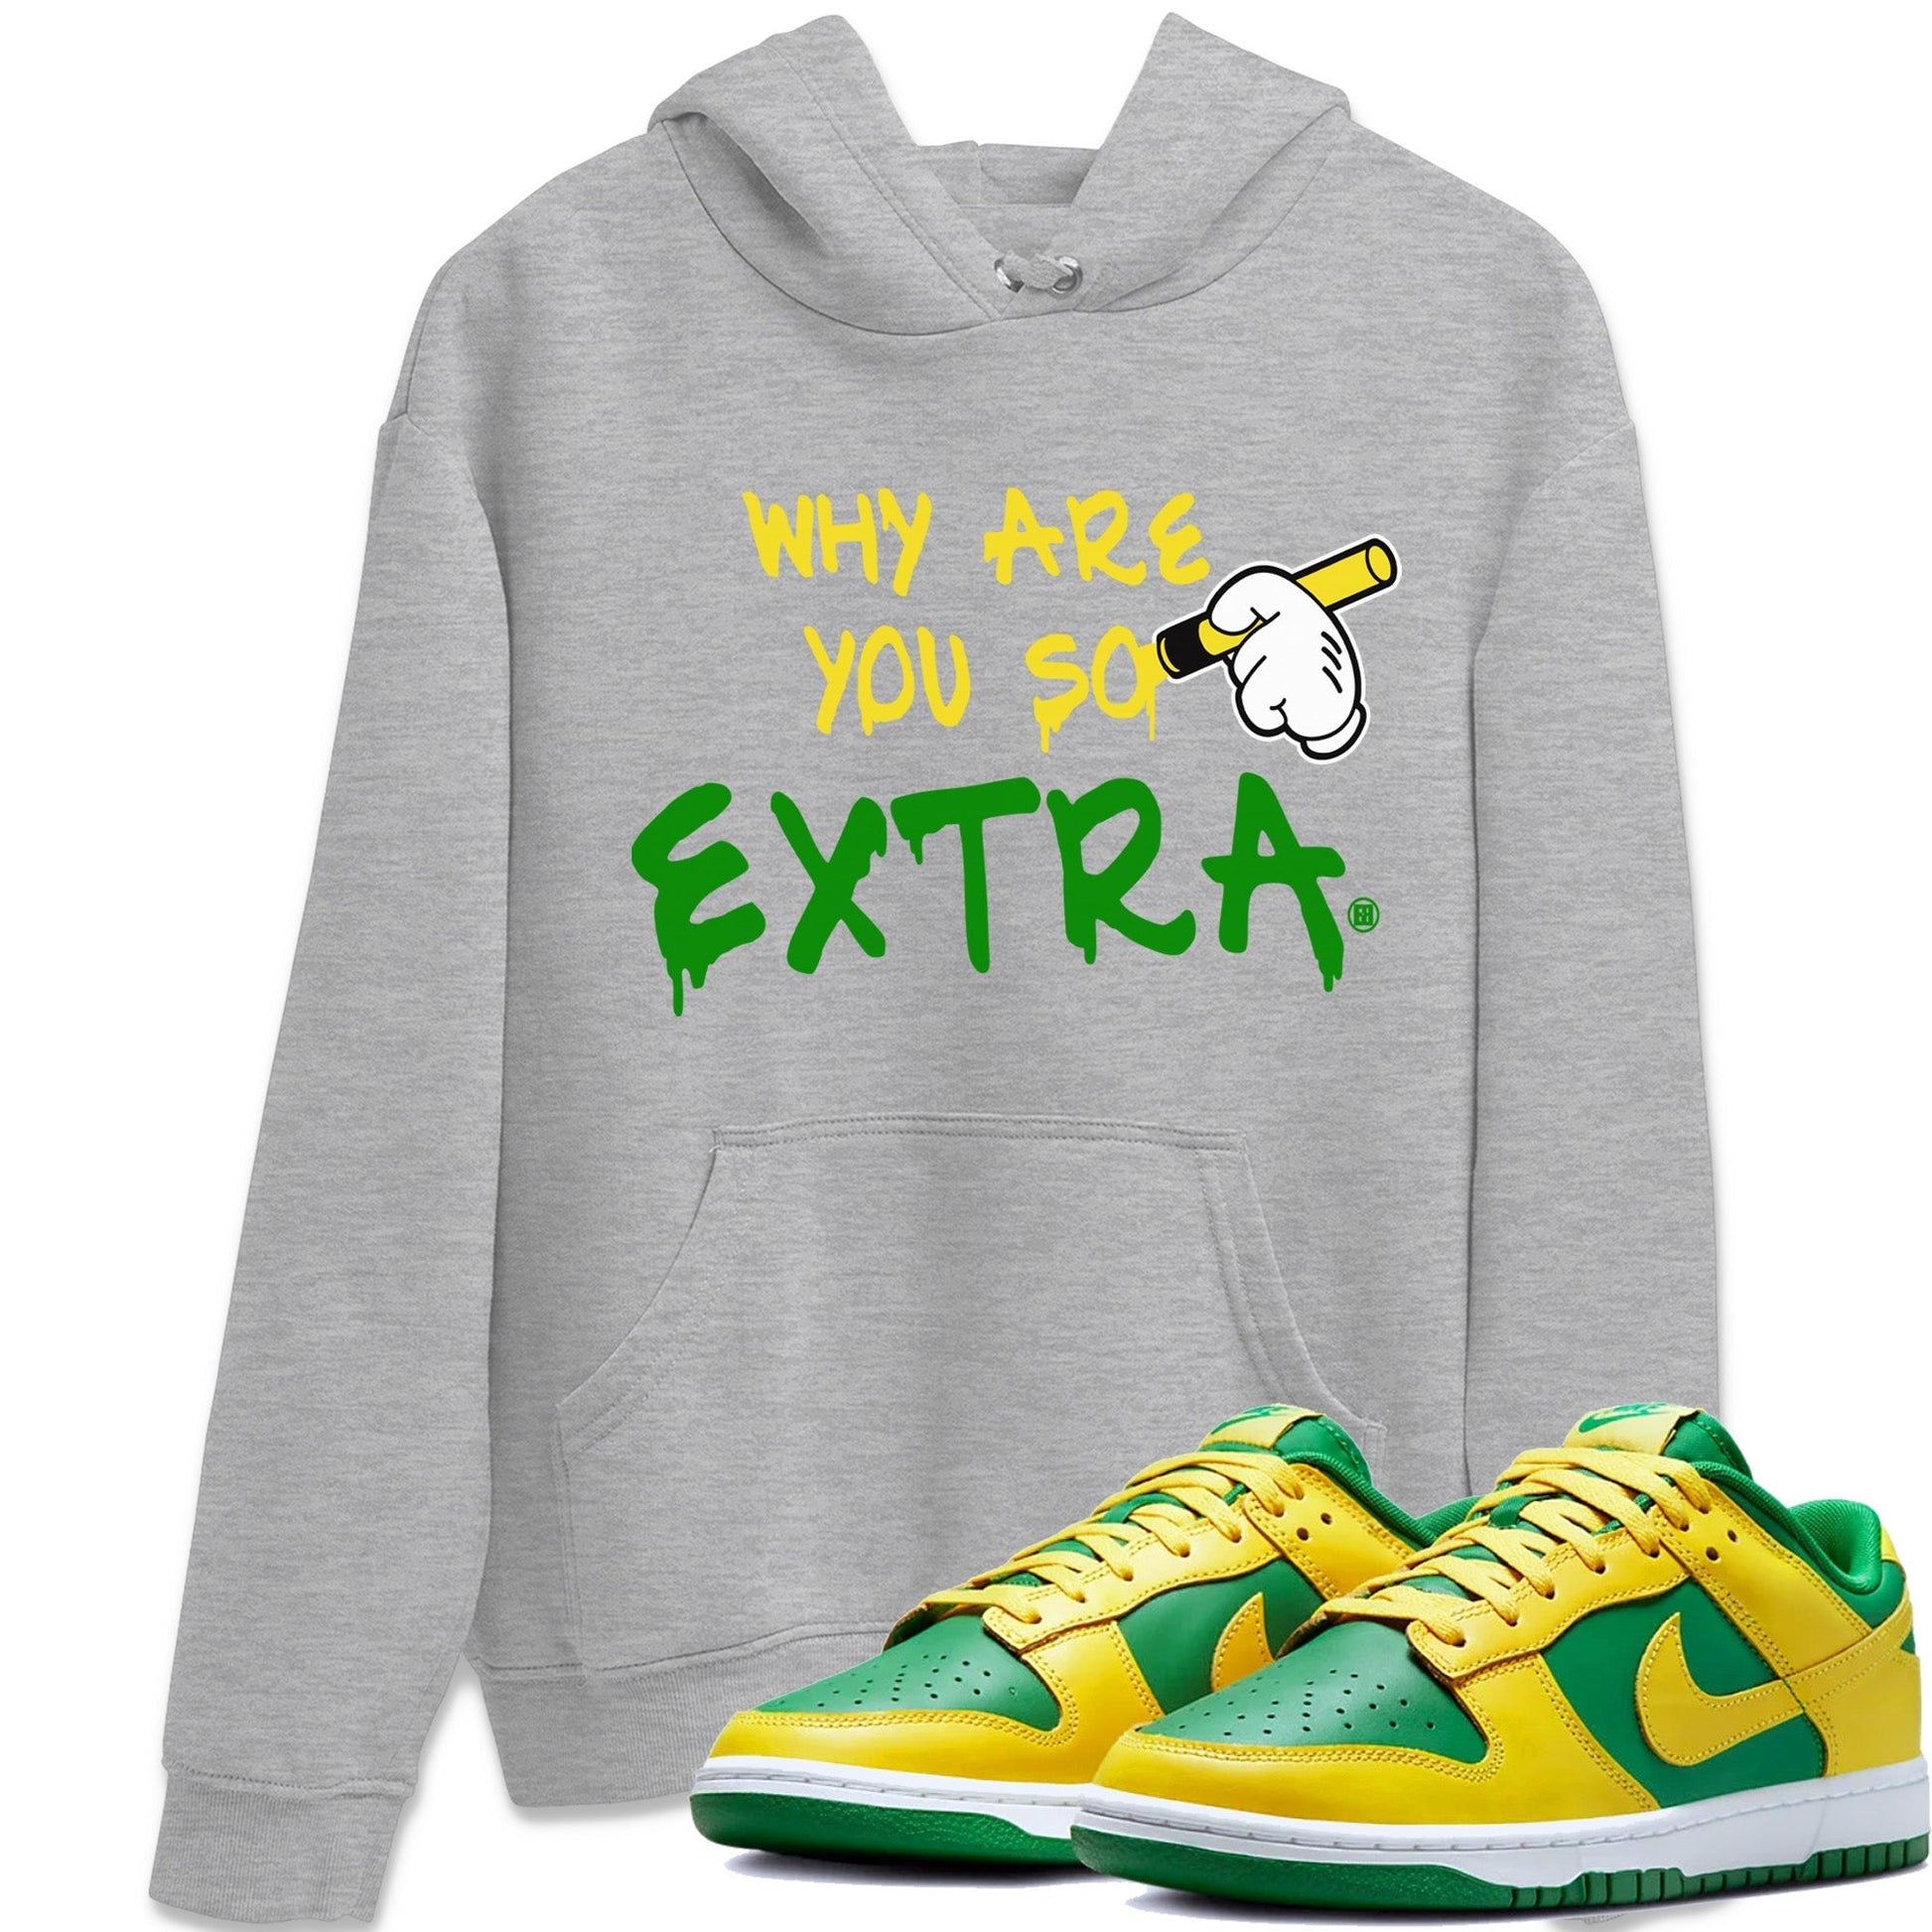 Dunk Reverse Brazil Sneaker Match Tees Why Are You So Extra Sneaker Tees Dunk Reverse Brazil Sneaker Release Tees Unisex Shirts